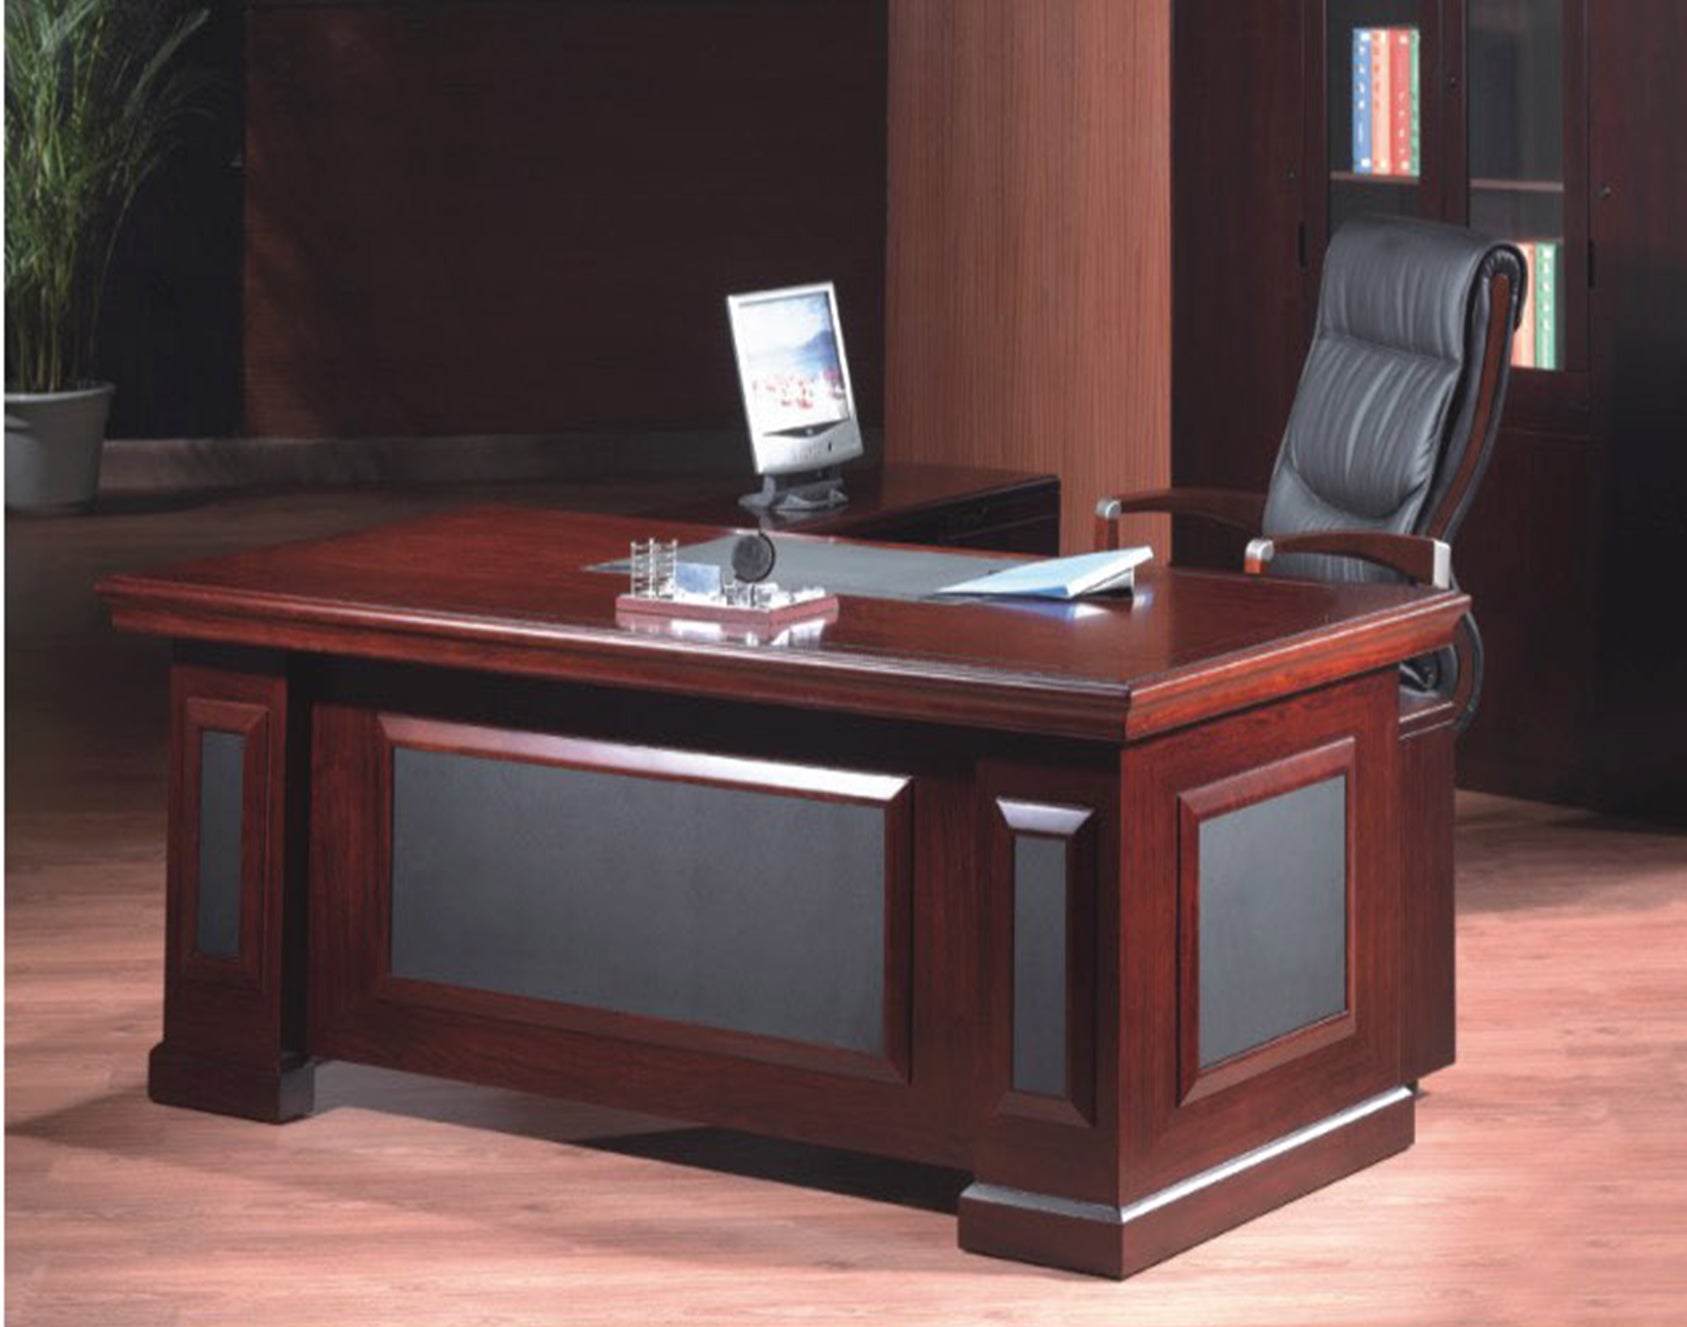 Mahogany Executive Desk With Leather Detailing - With Pedestal and Return - 1819 Near Me